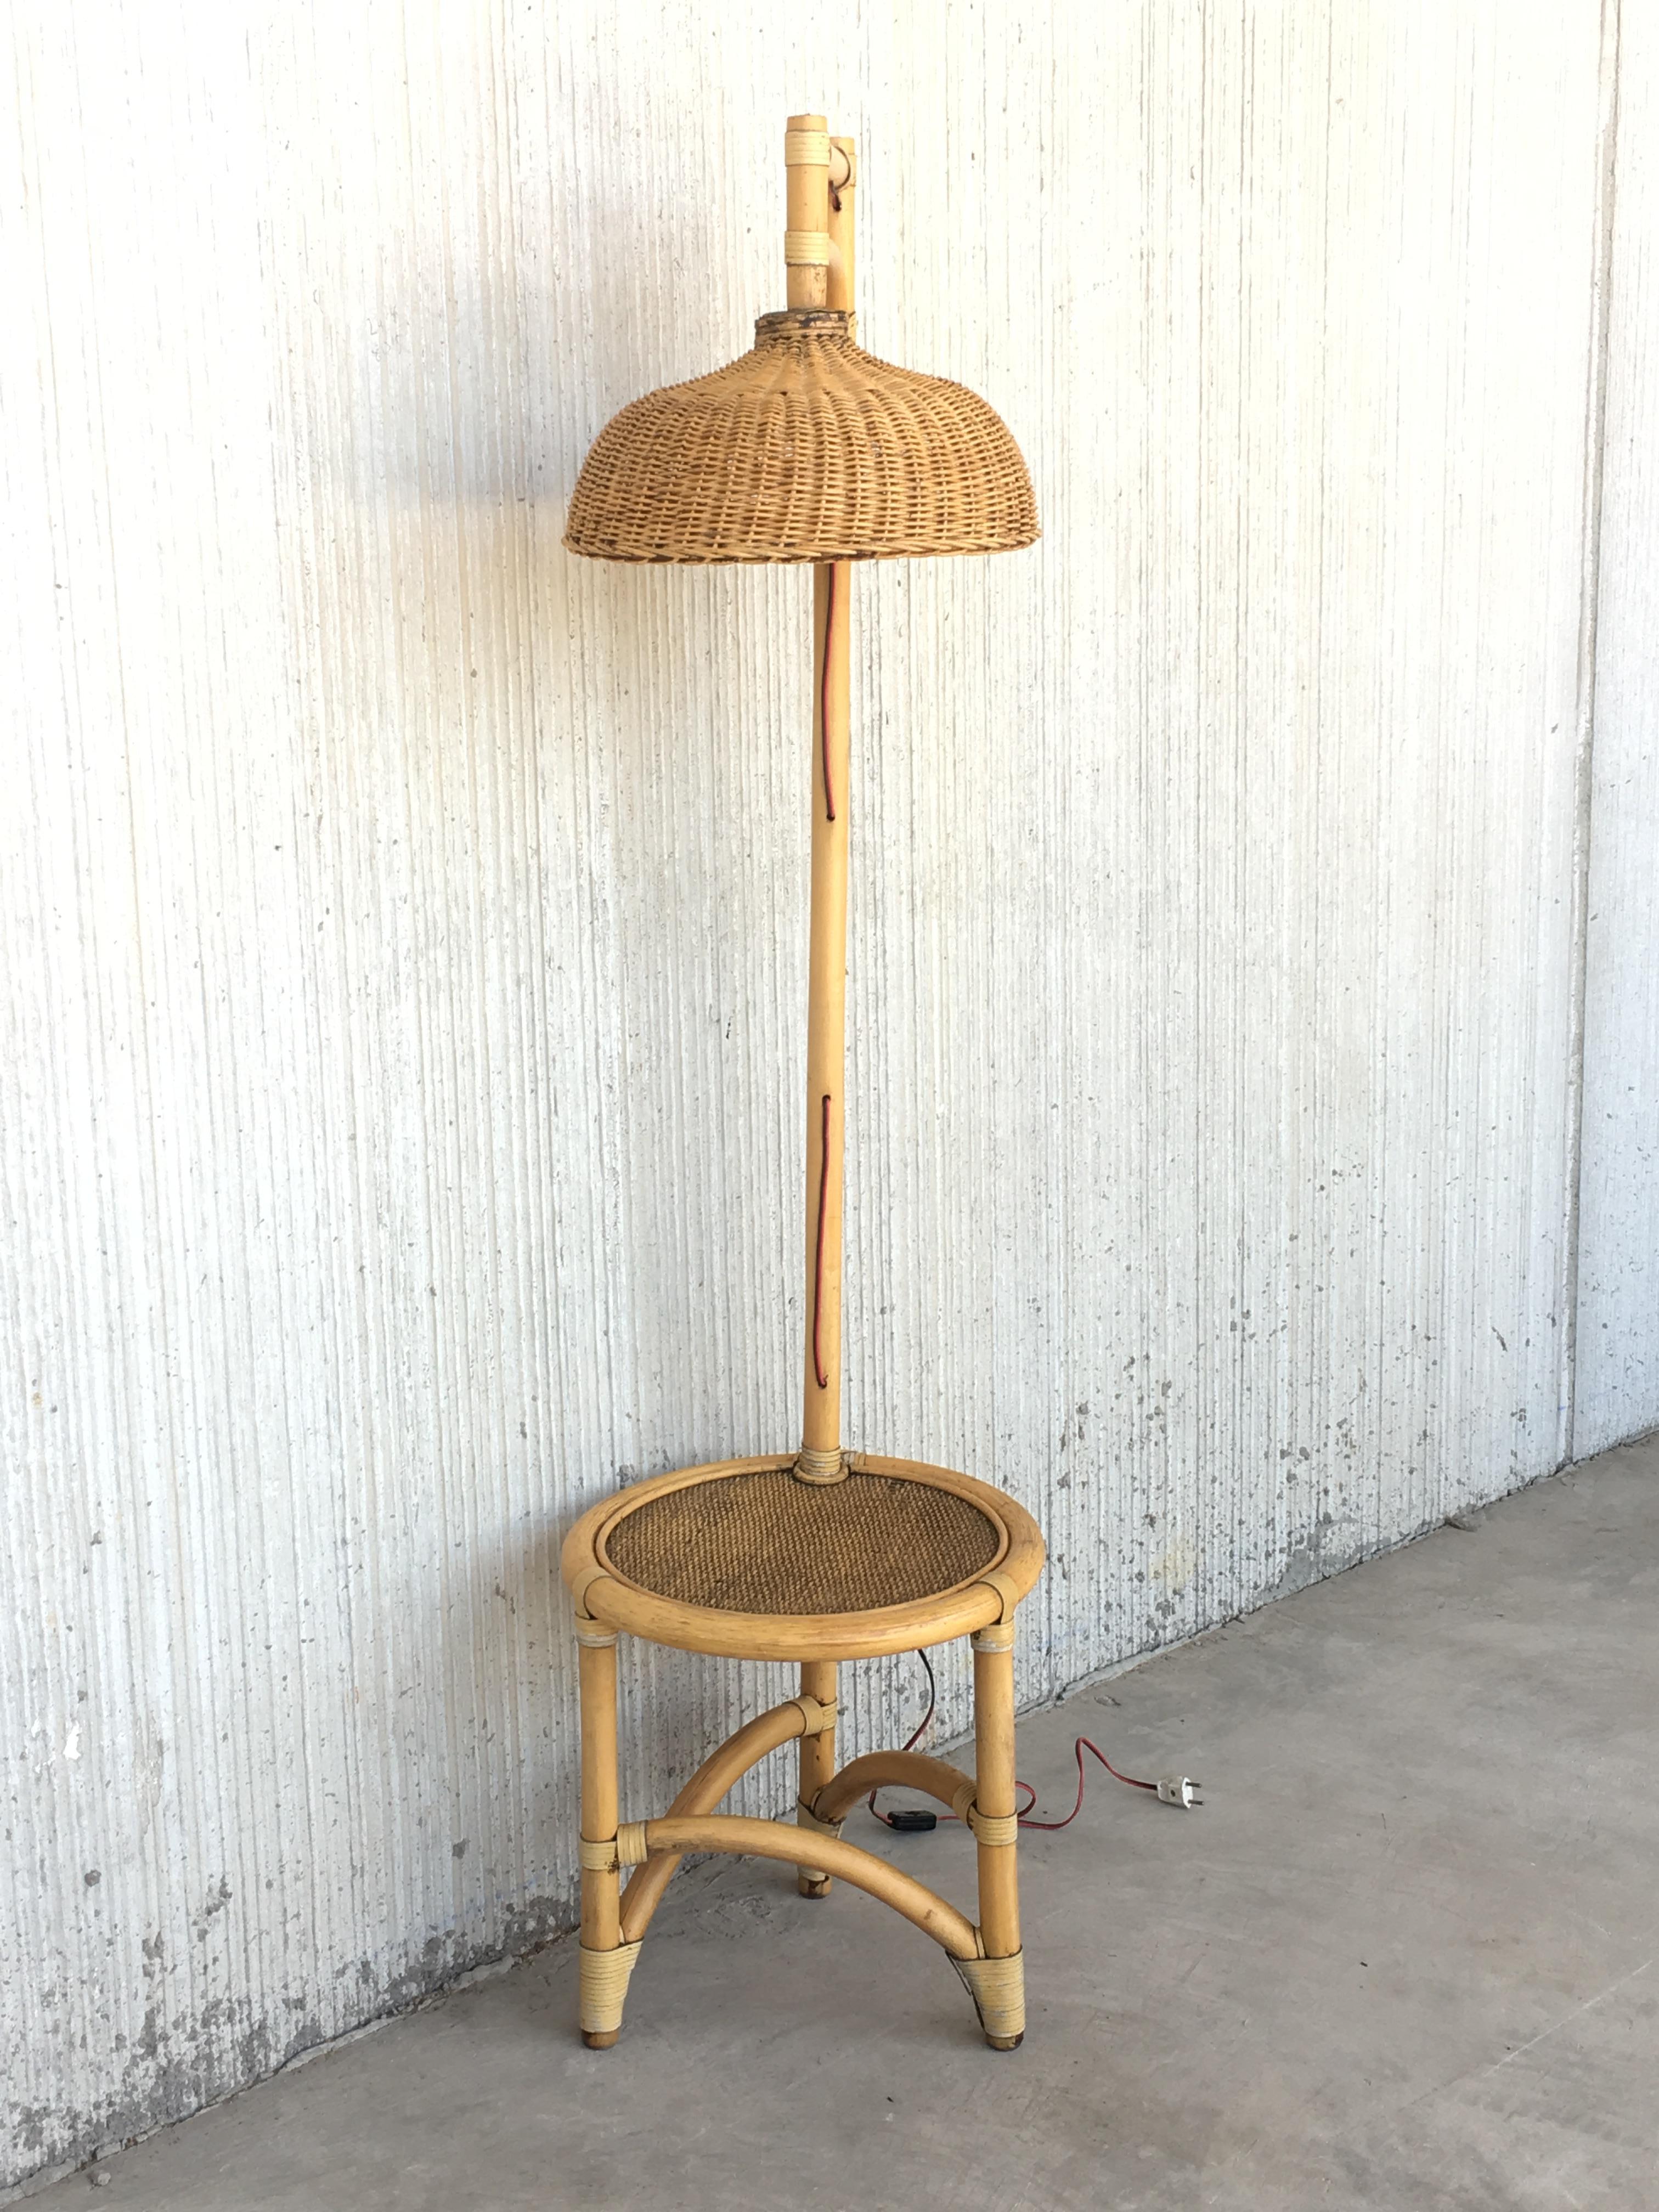 Mid-Century Modern Midcentrury Bamboo and Wicker Floor Lamp with Table